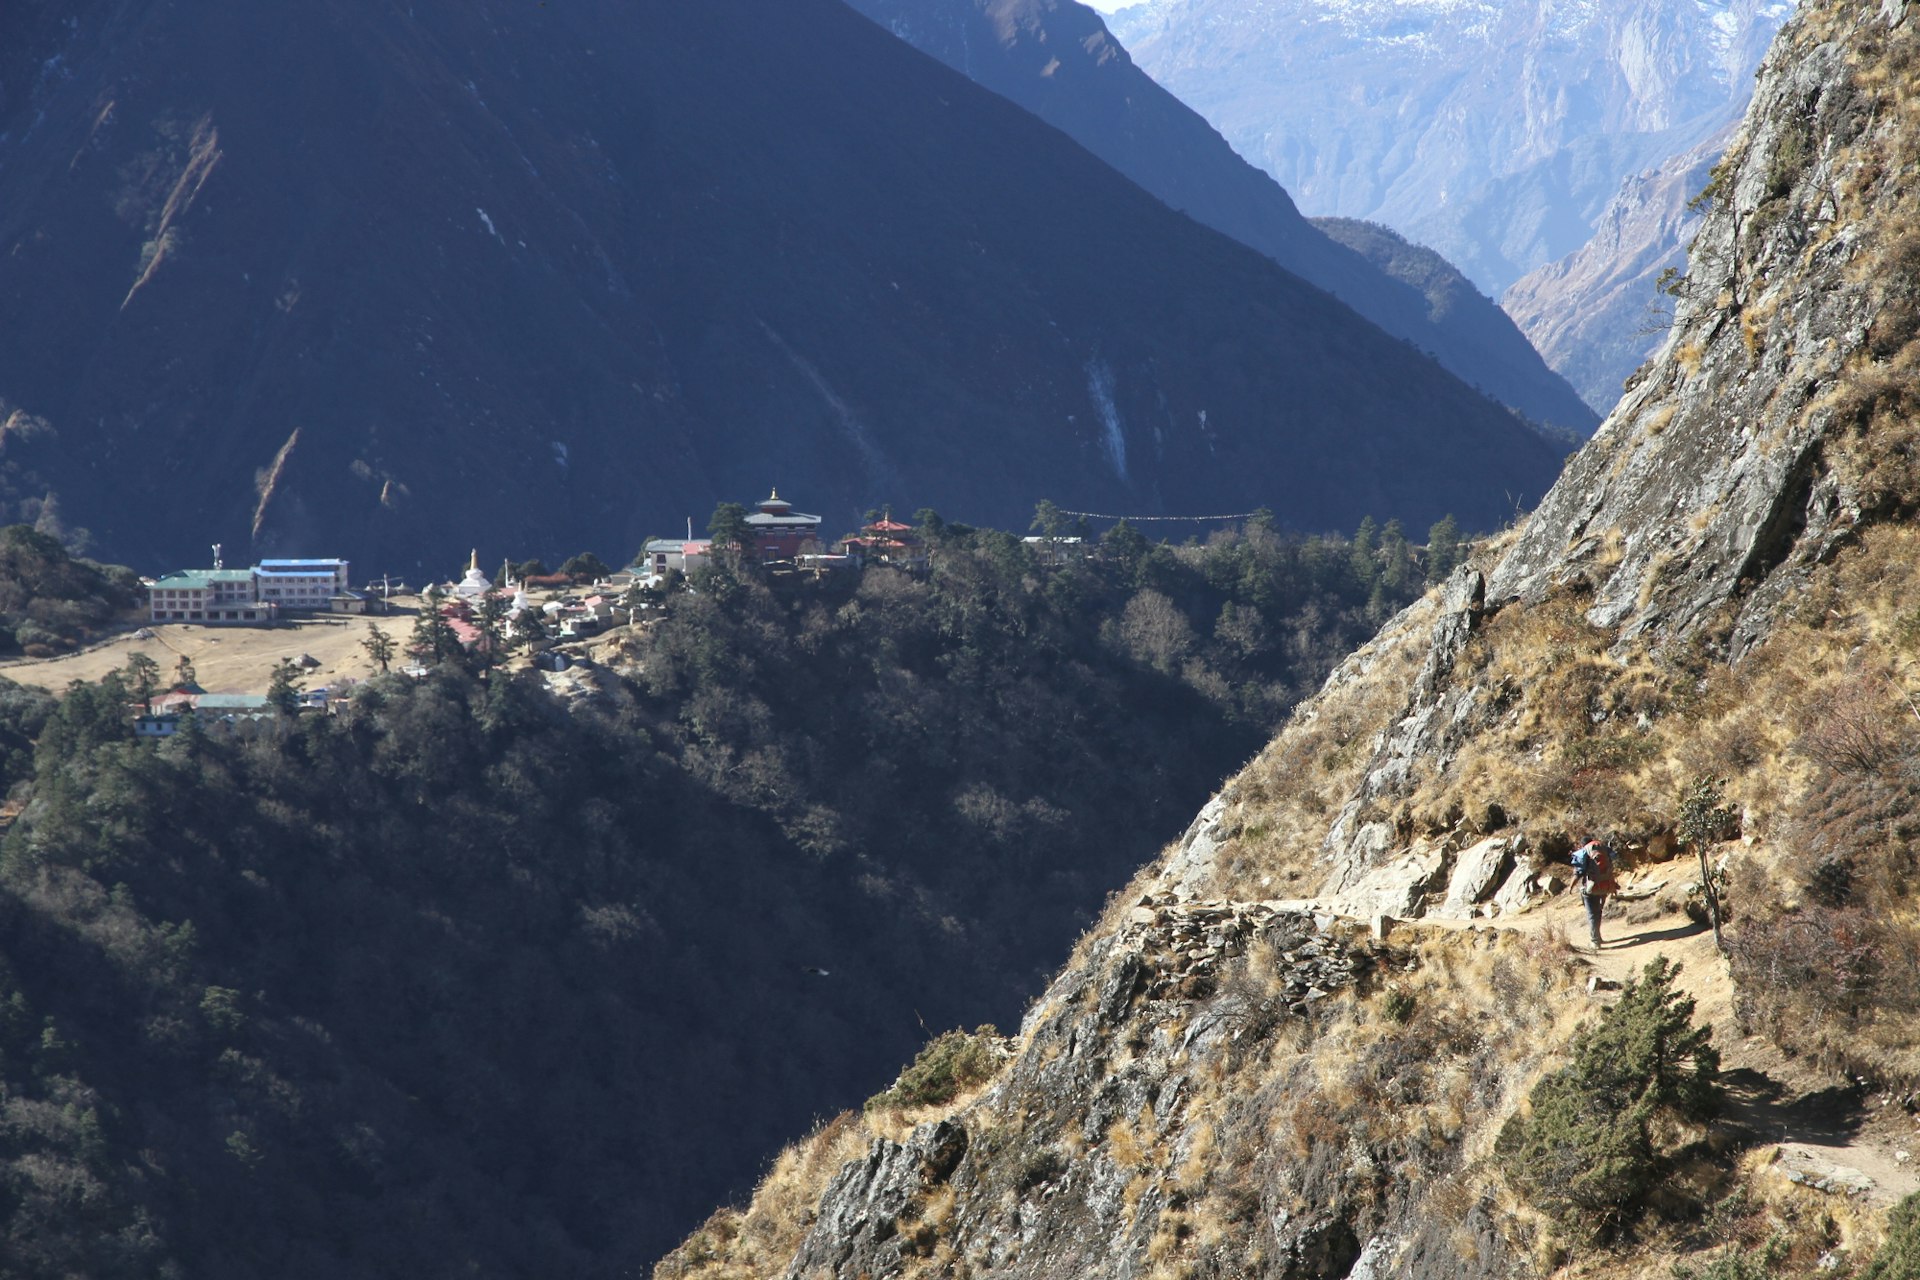 Tengboche seen from the trail from Pangboche to Phortse. Image by Bradley Mayhew / Lonely Planet